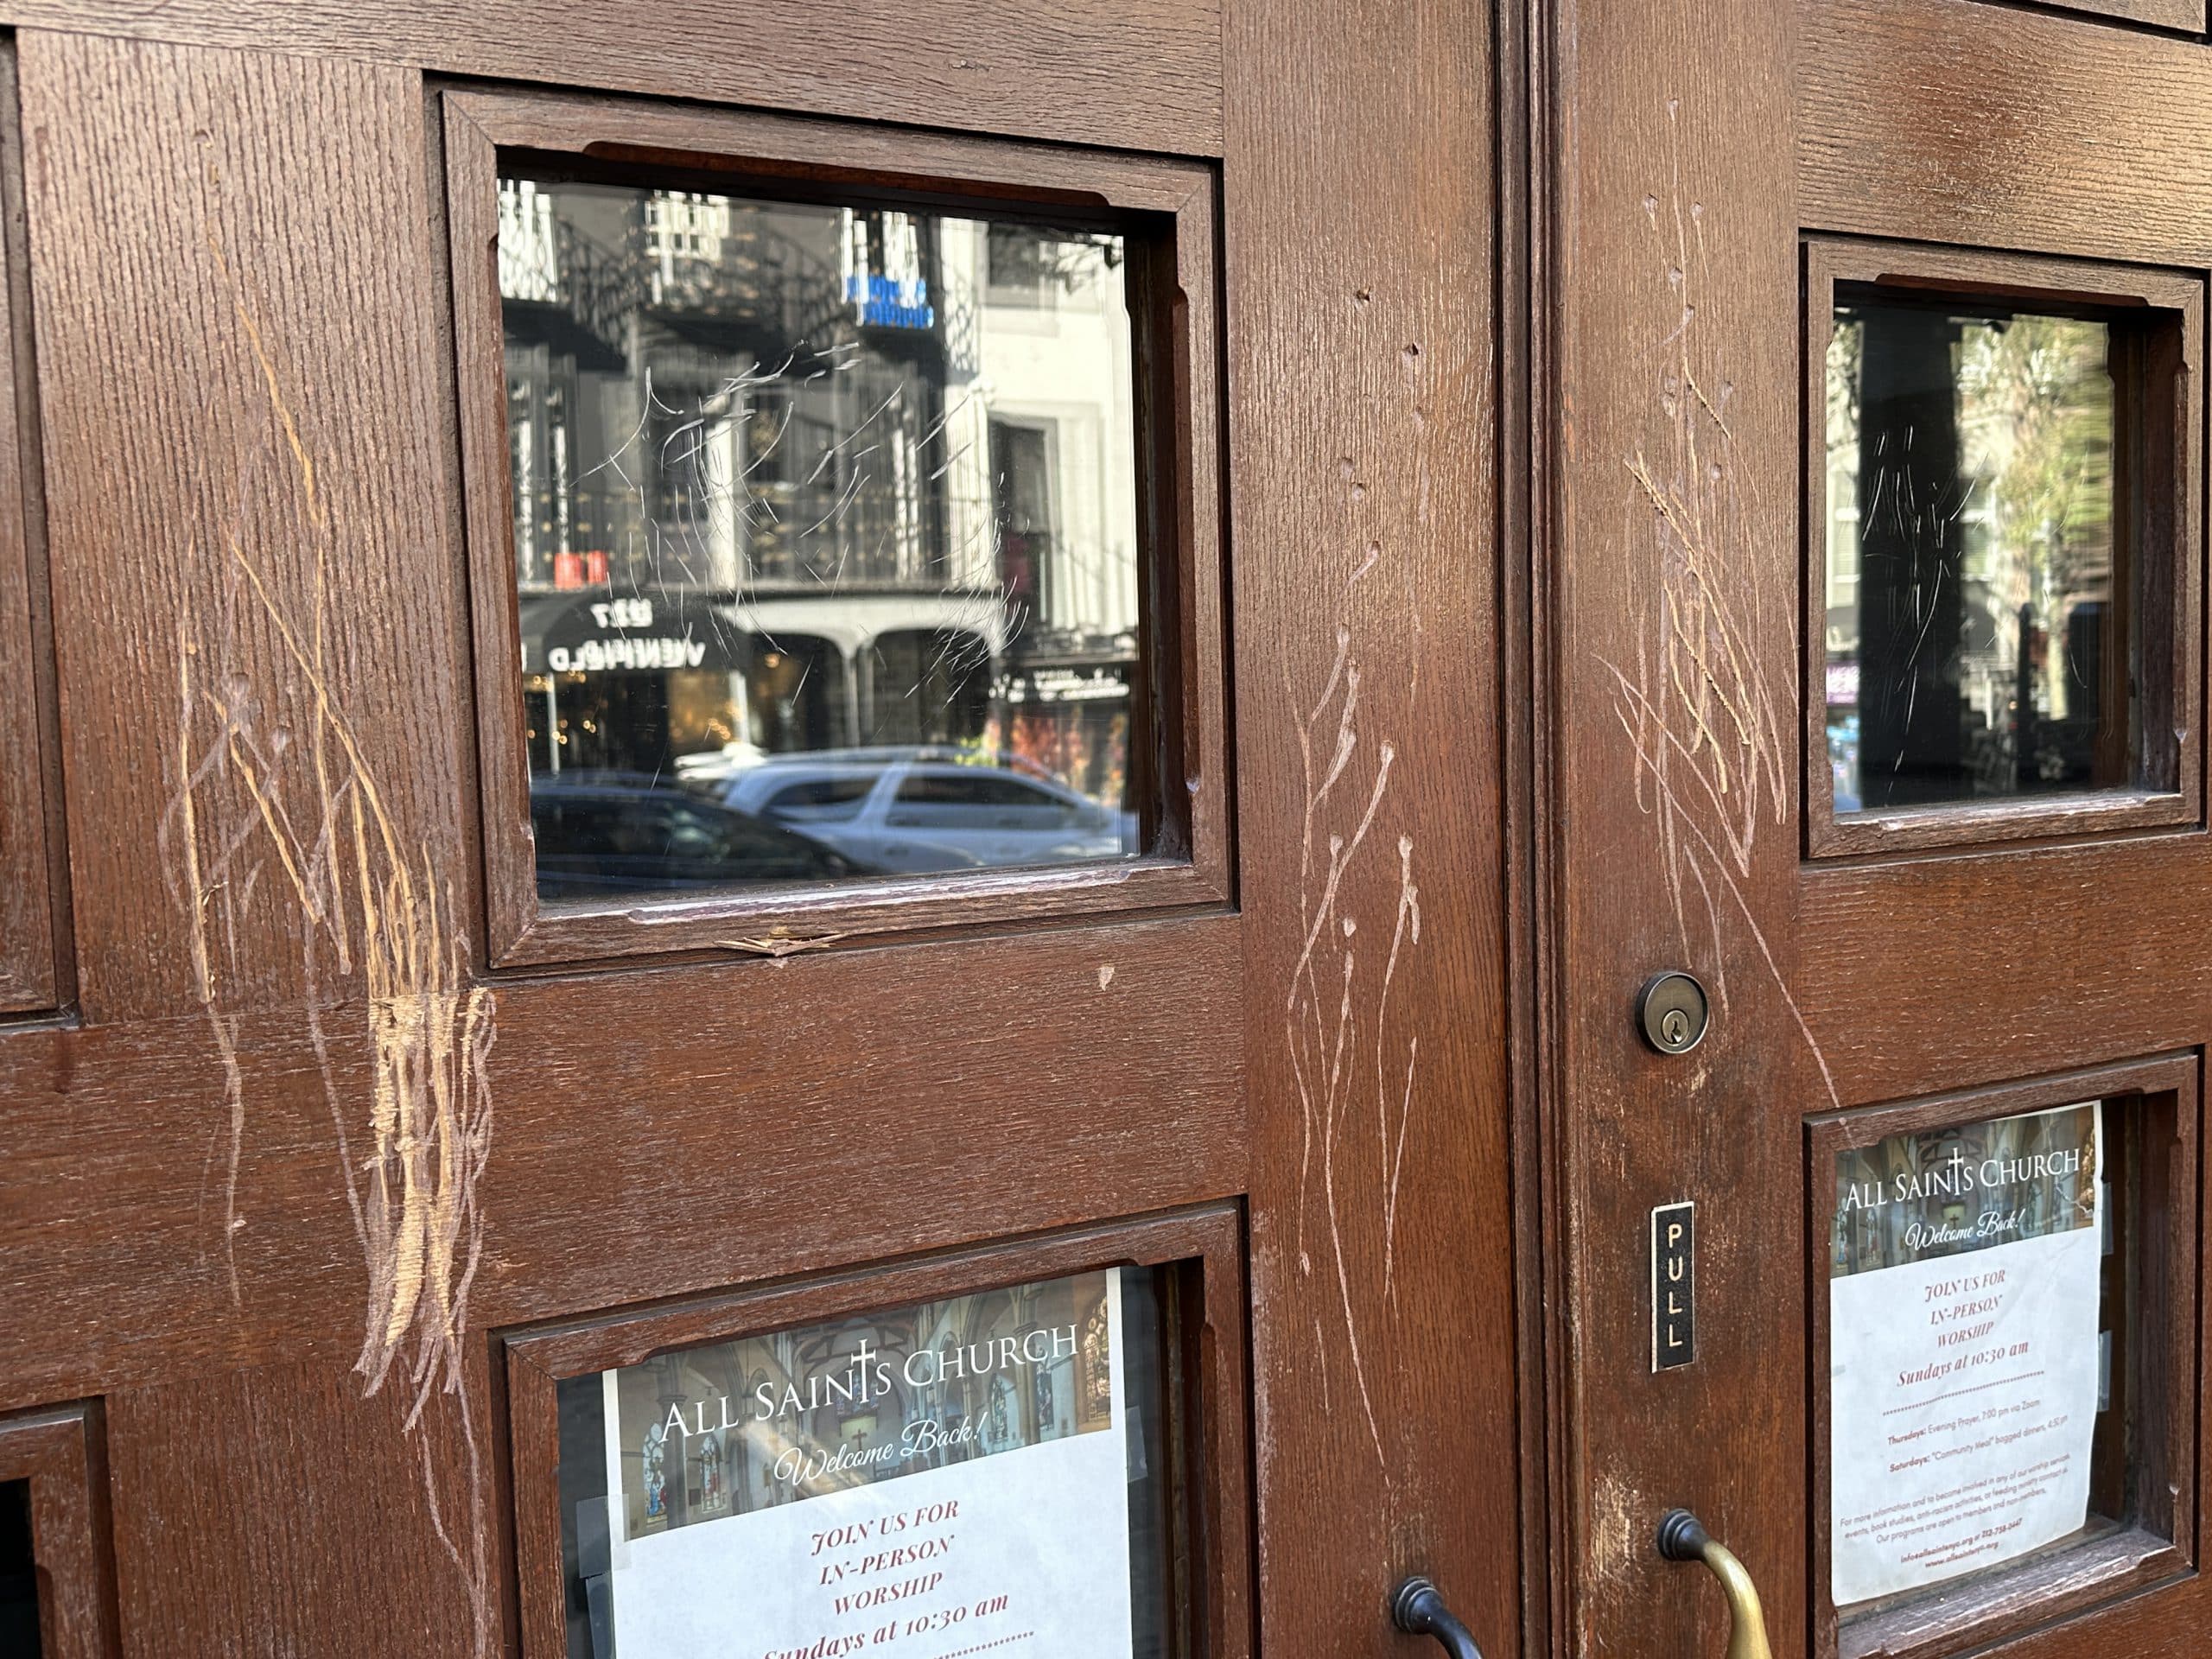 Deep scratches could be seen on the doors to All Saint's Episcopal Church | Upper East Site